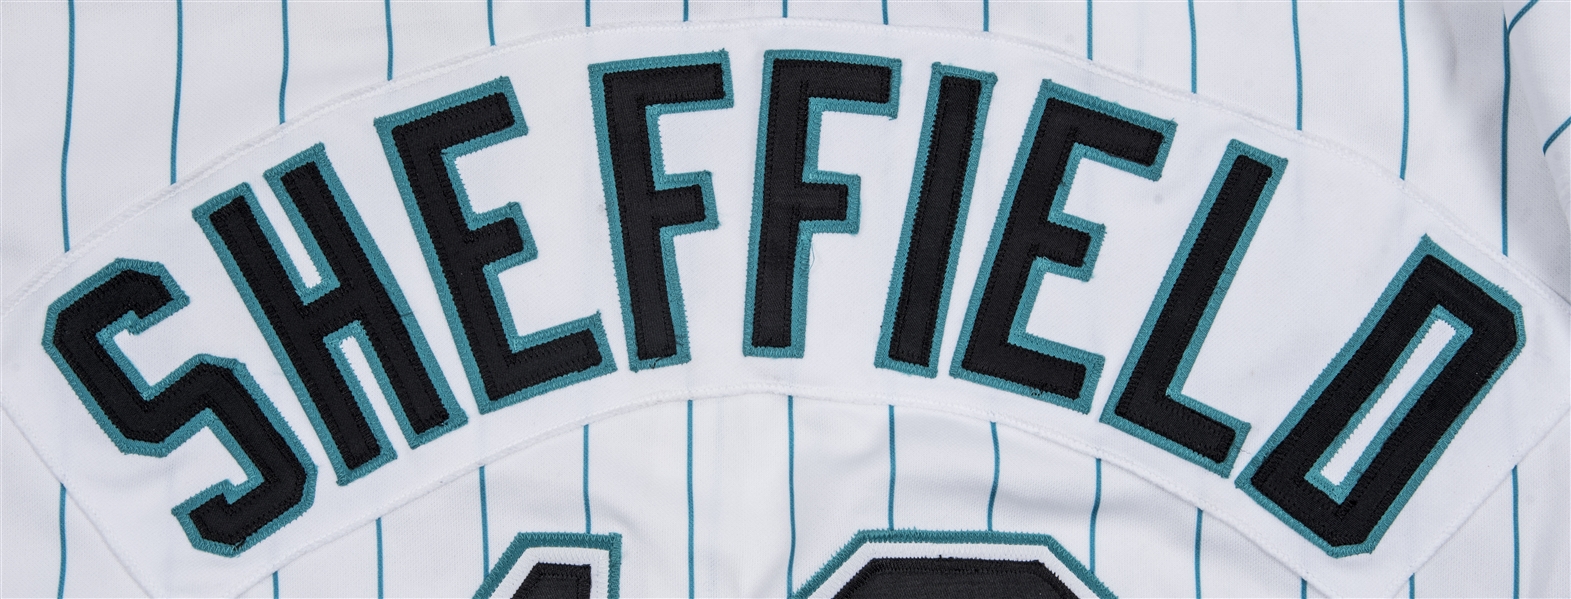 Lot Detail - 1994 Gary Sheffield Game Used Florida Marlins Home Jersey